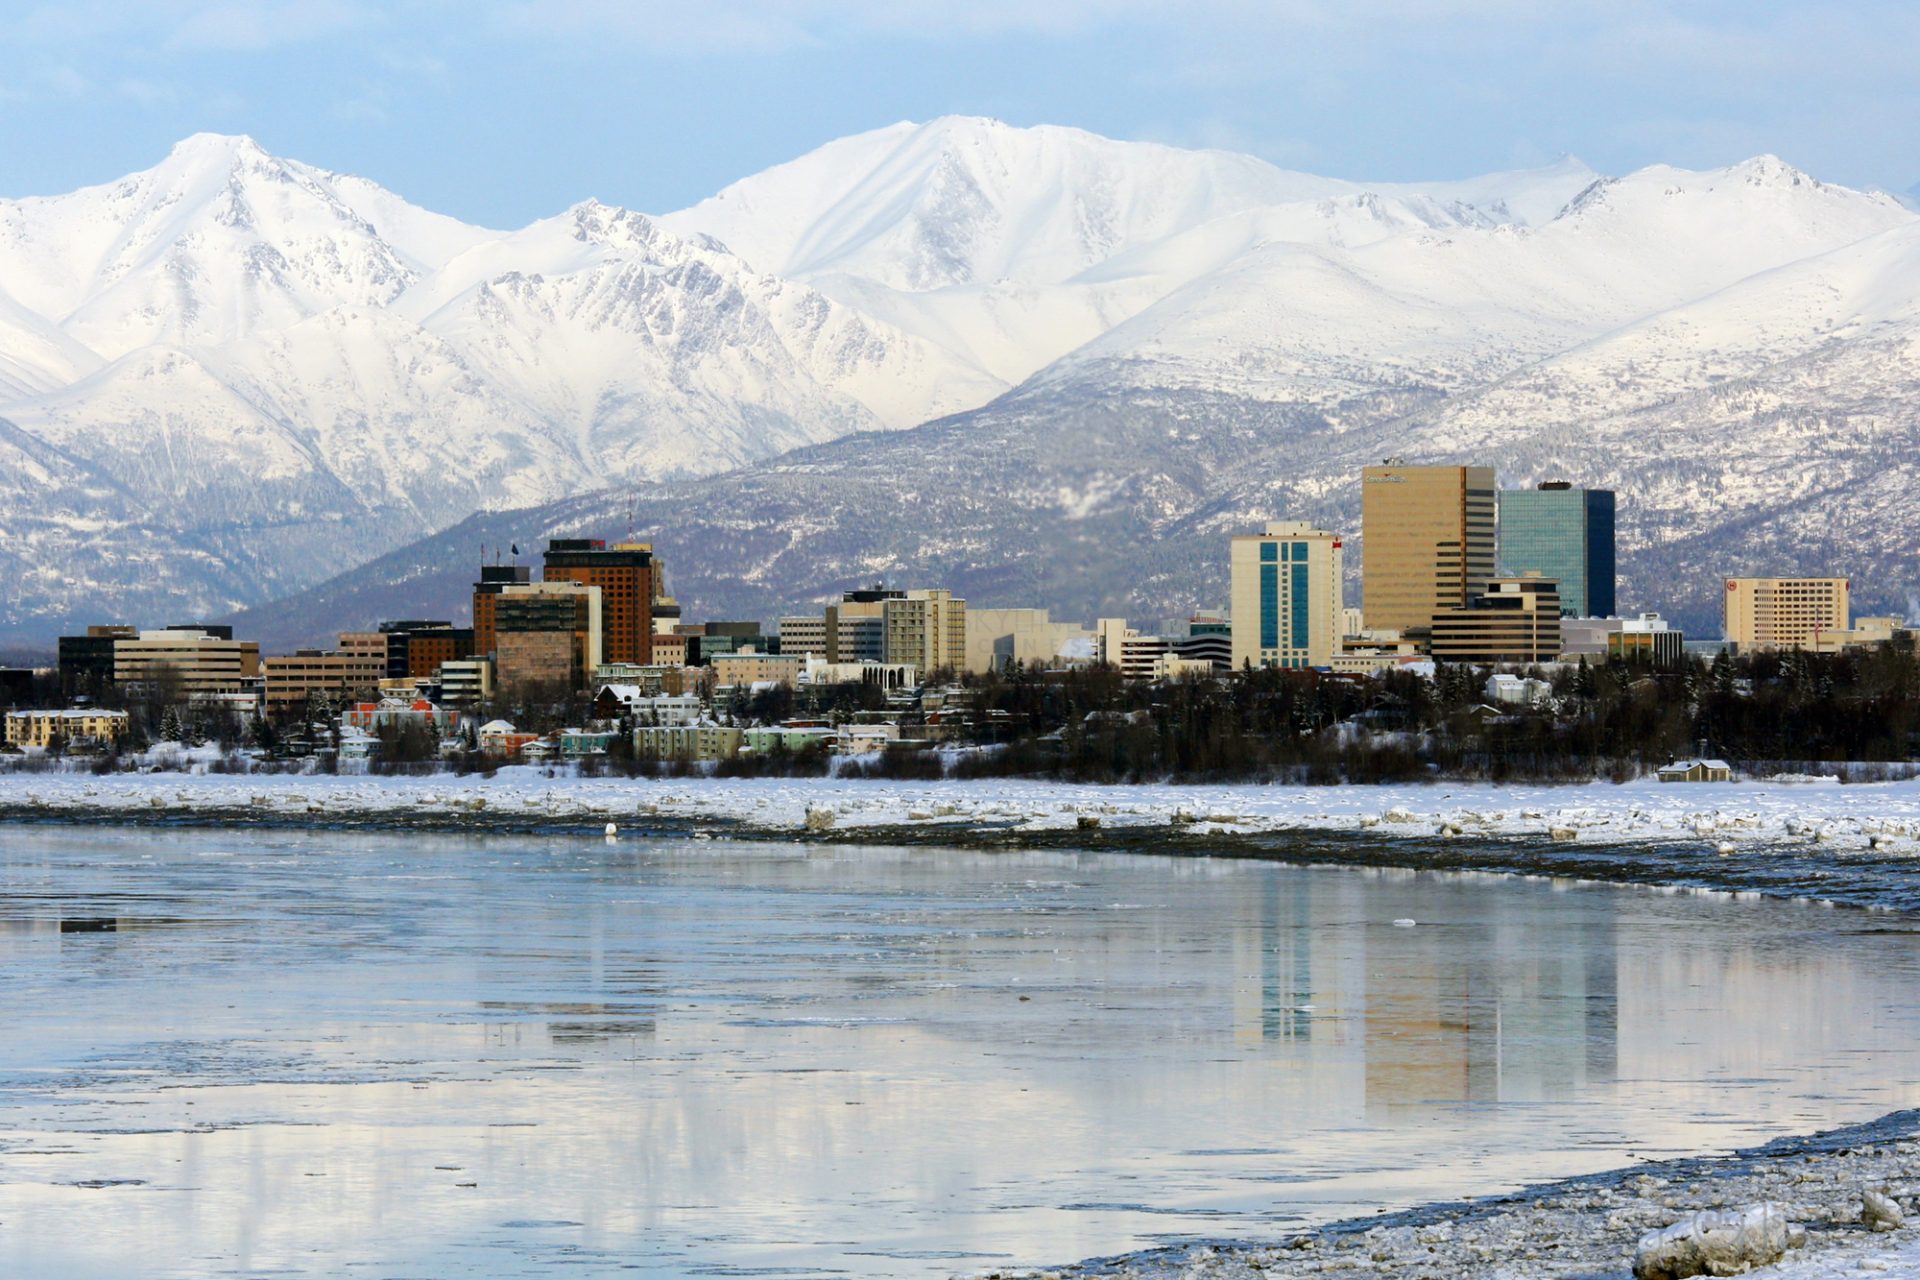 The coldest major city in the U.S., can you guess where? Photo Credit: Skyline Scenes